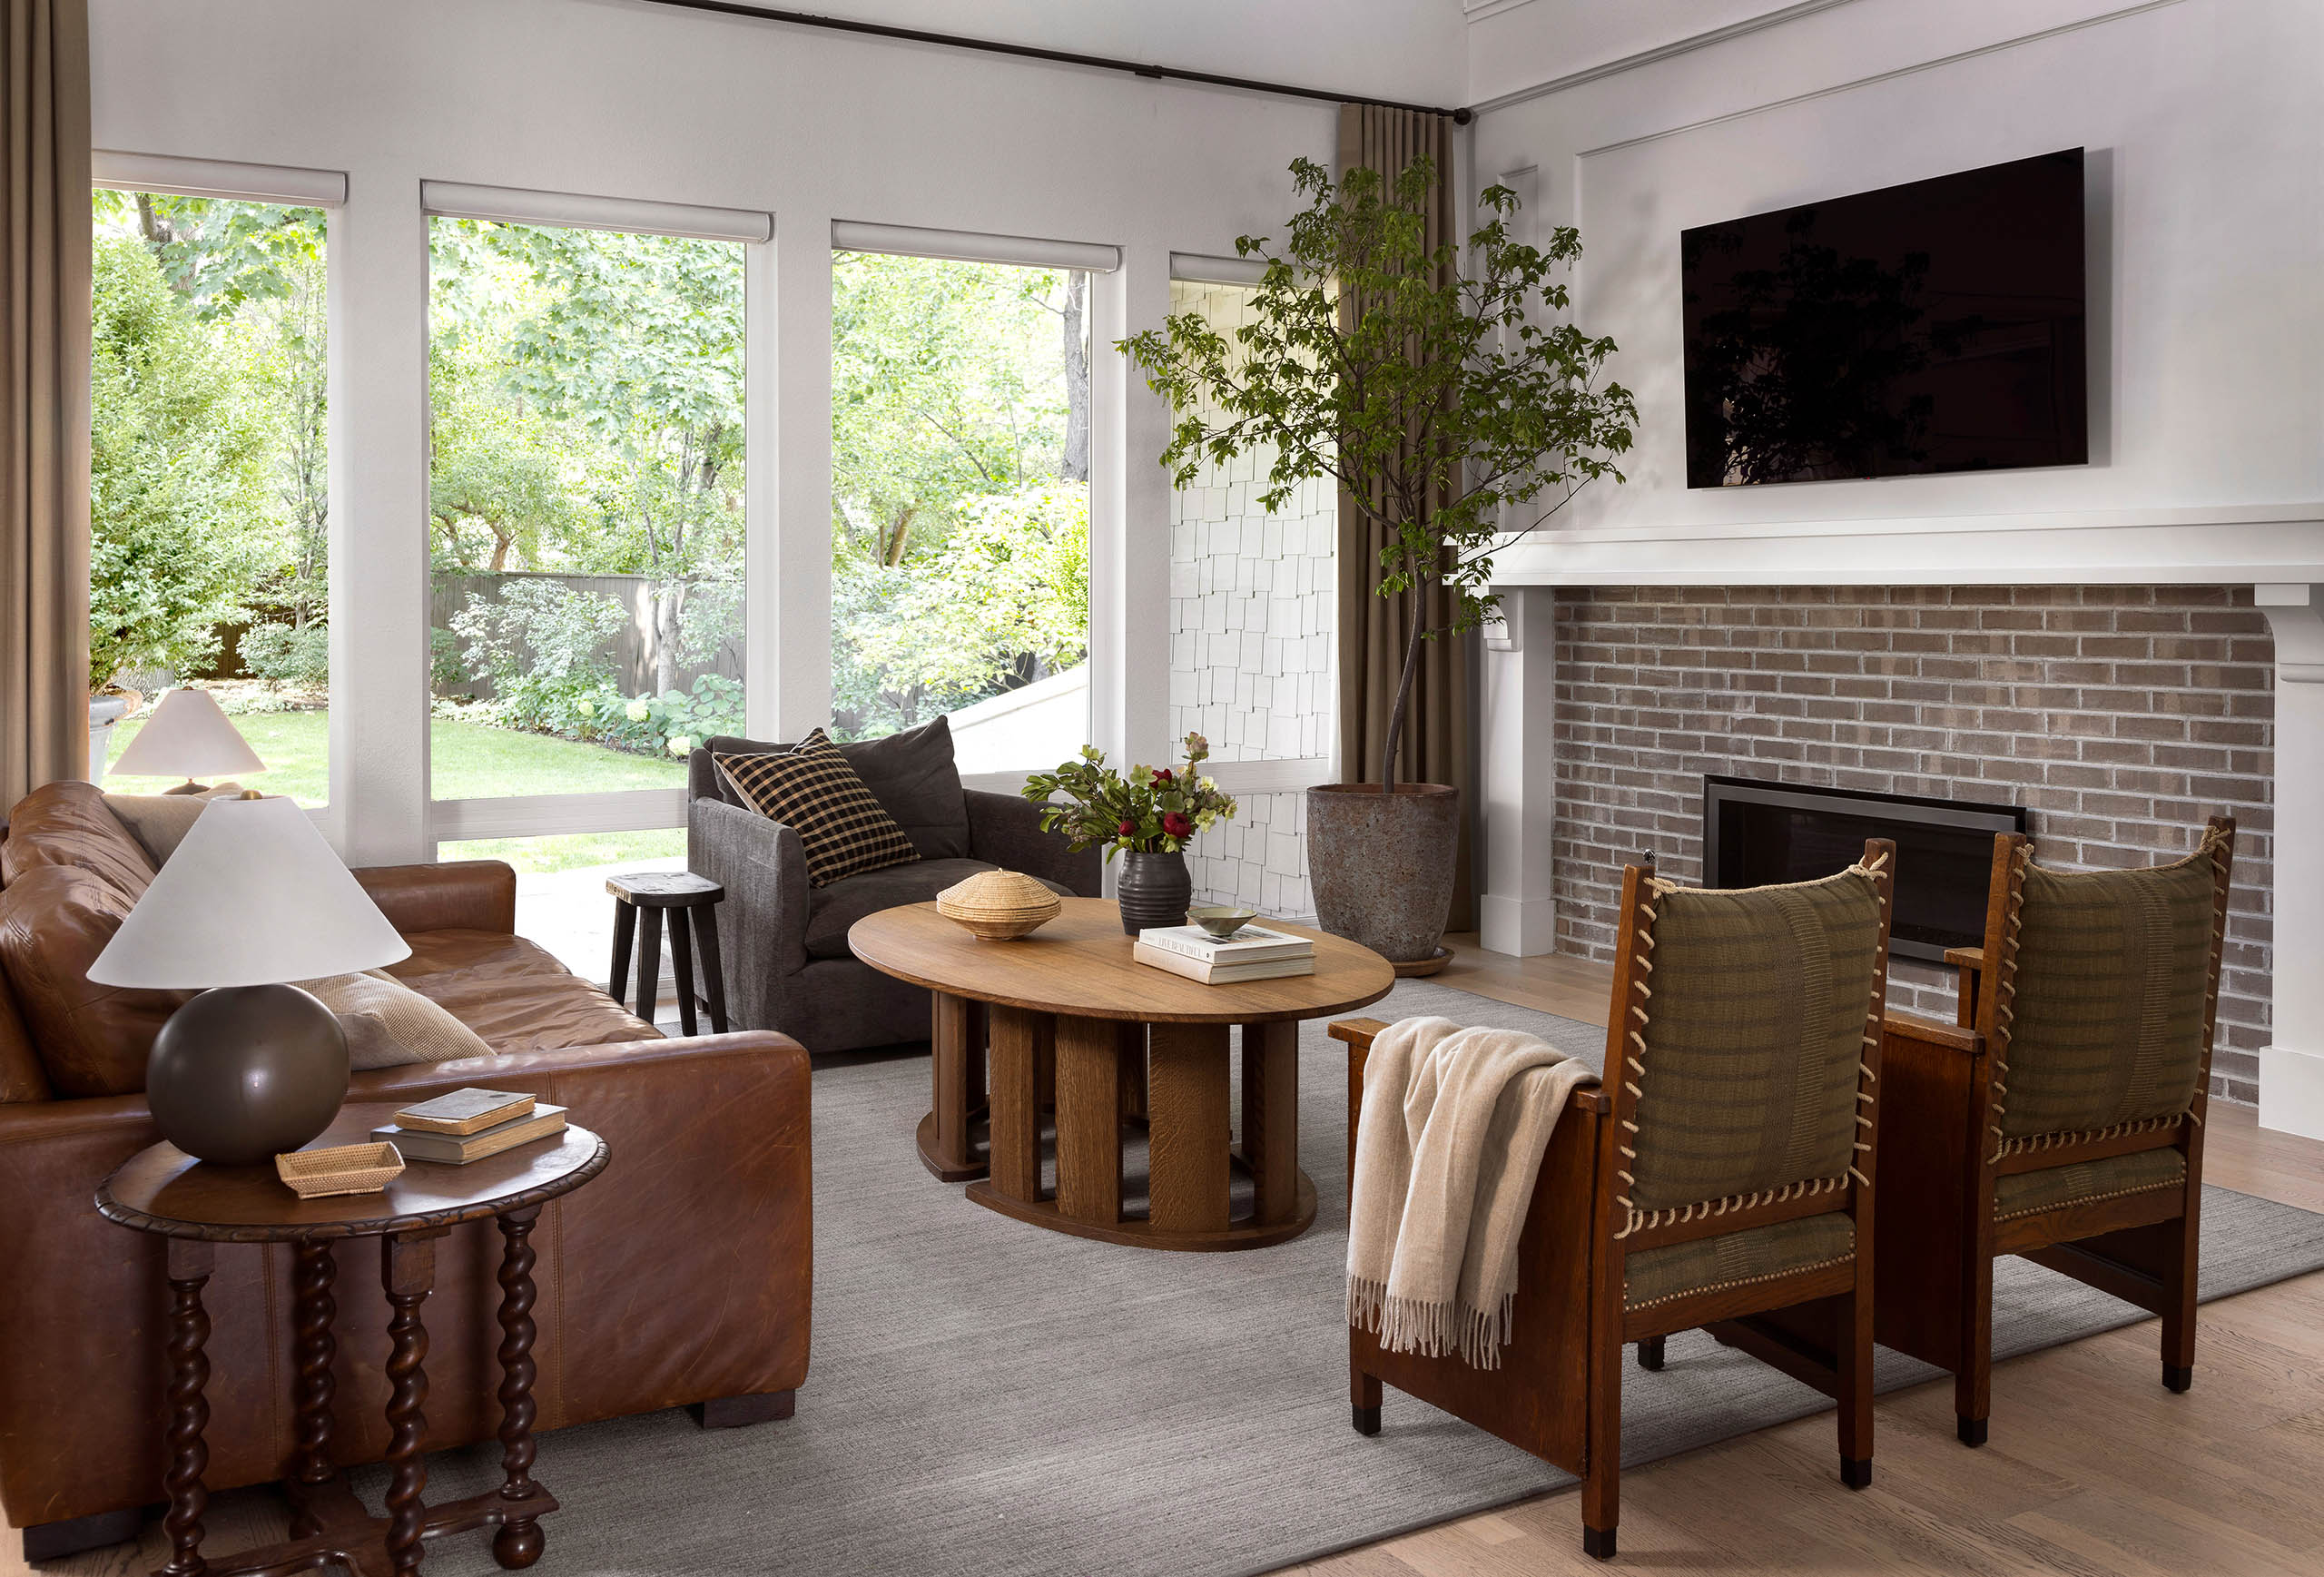 A warm, inviting living room design by Annabode